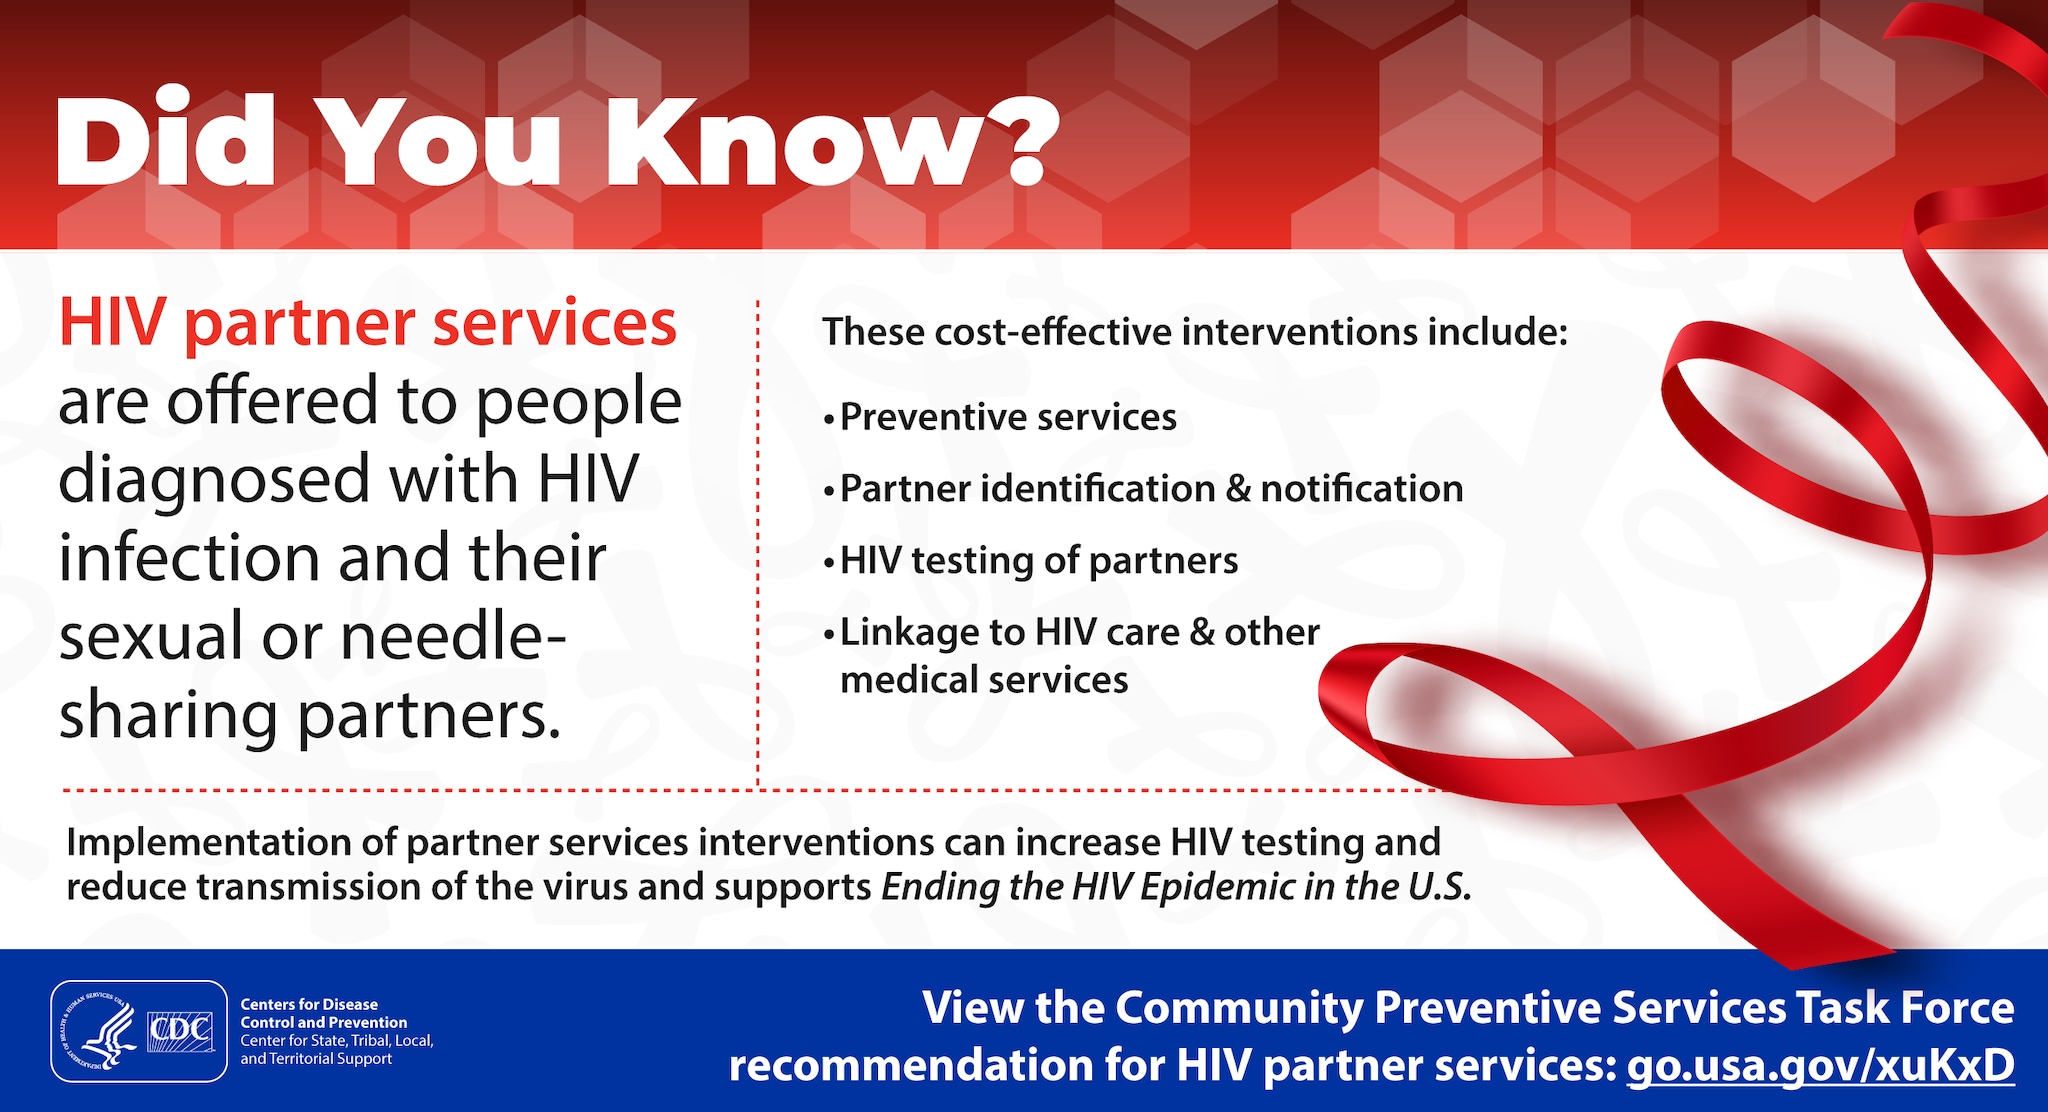 Did You Know? HIV partner services are offered to people diagnosed with HIV infection and their sexual or needle-sharing partners. These cost-effective interventions include: Preventive services, Partner identification & notification, HIV testing of partners, and Linkage to HIV care & other medical services. Implementation of partner services interventions can increase HIV testing and reduce transmission of the virus and supports Ending the HIV Epidemic in the U.S. View the Community Preventive Services Task Force recommendation for HIV partner services: http://go.usa.gov/xuKxD